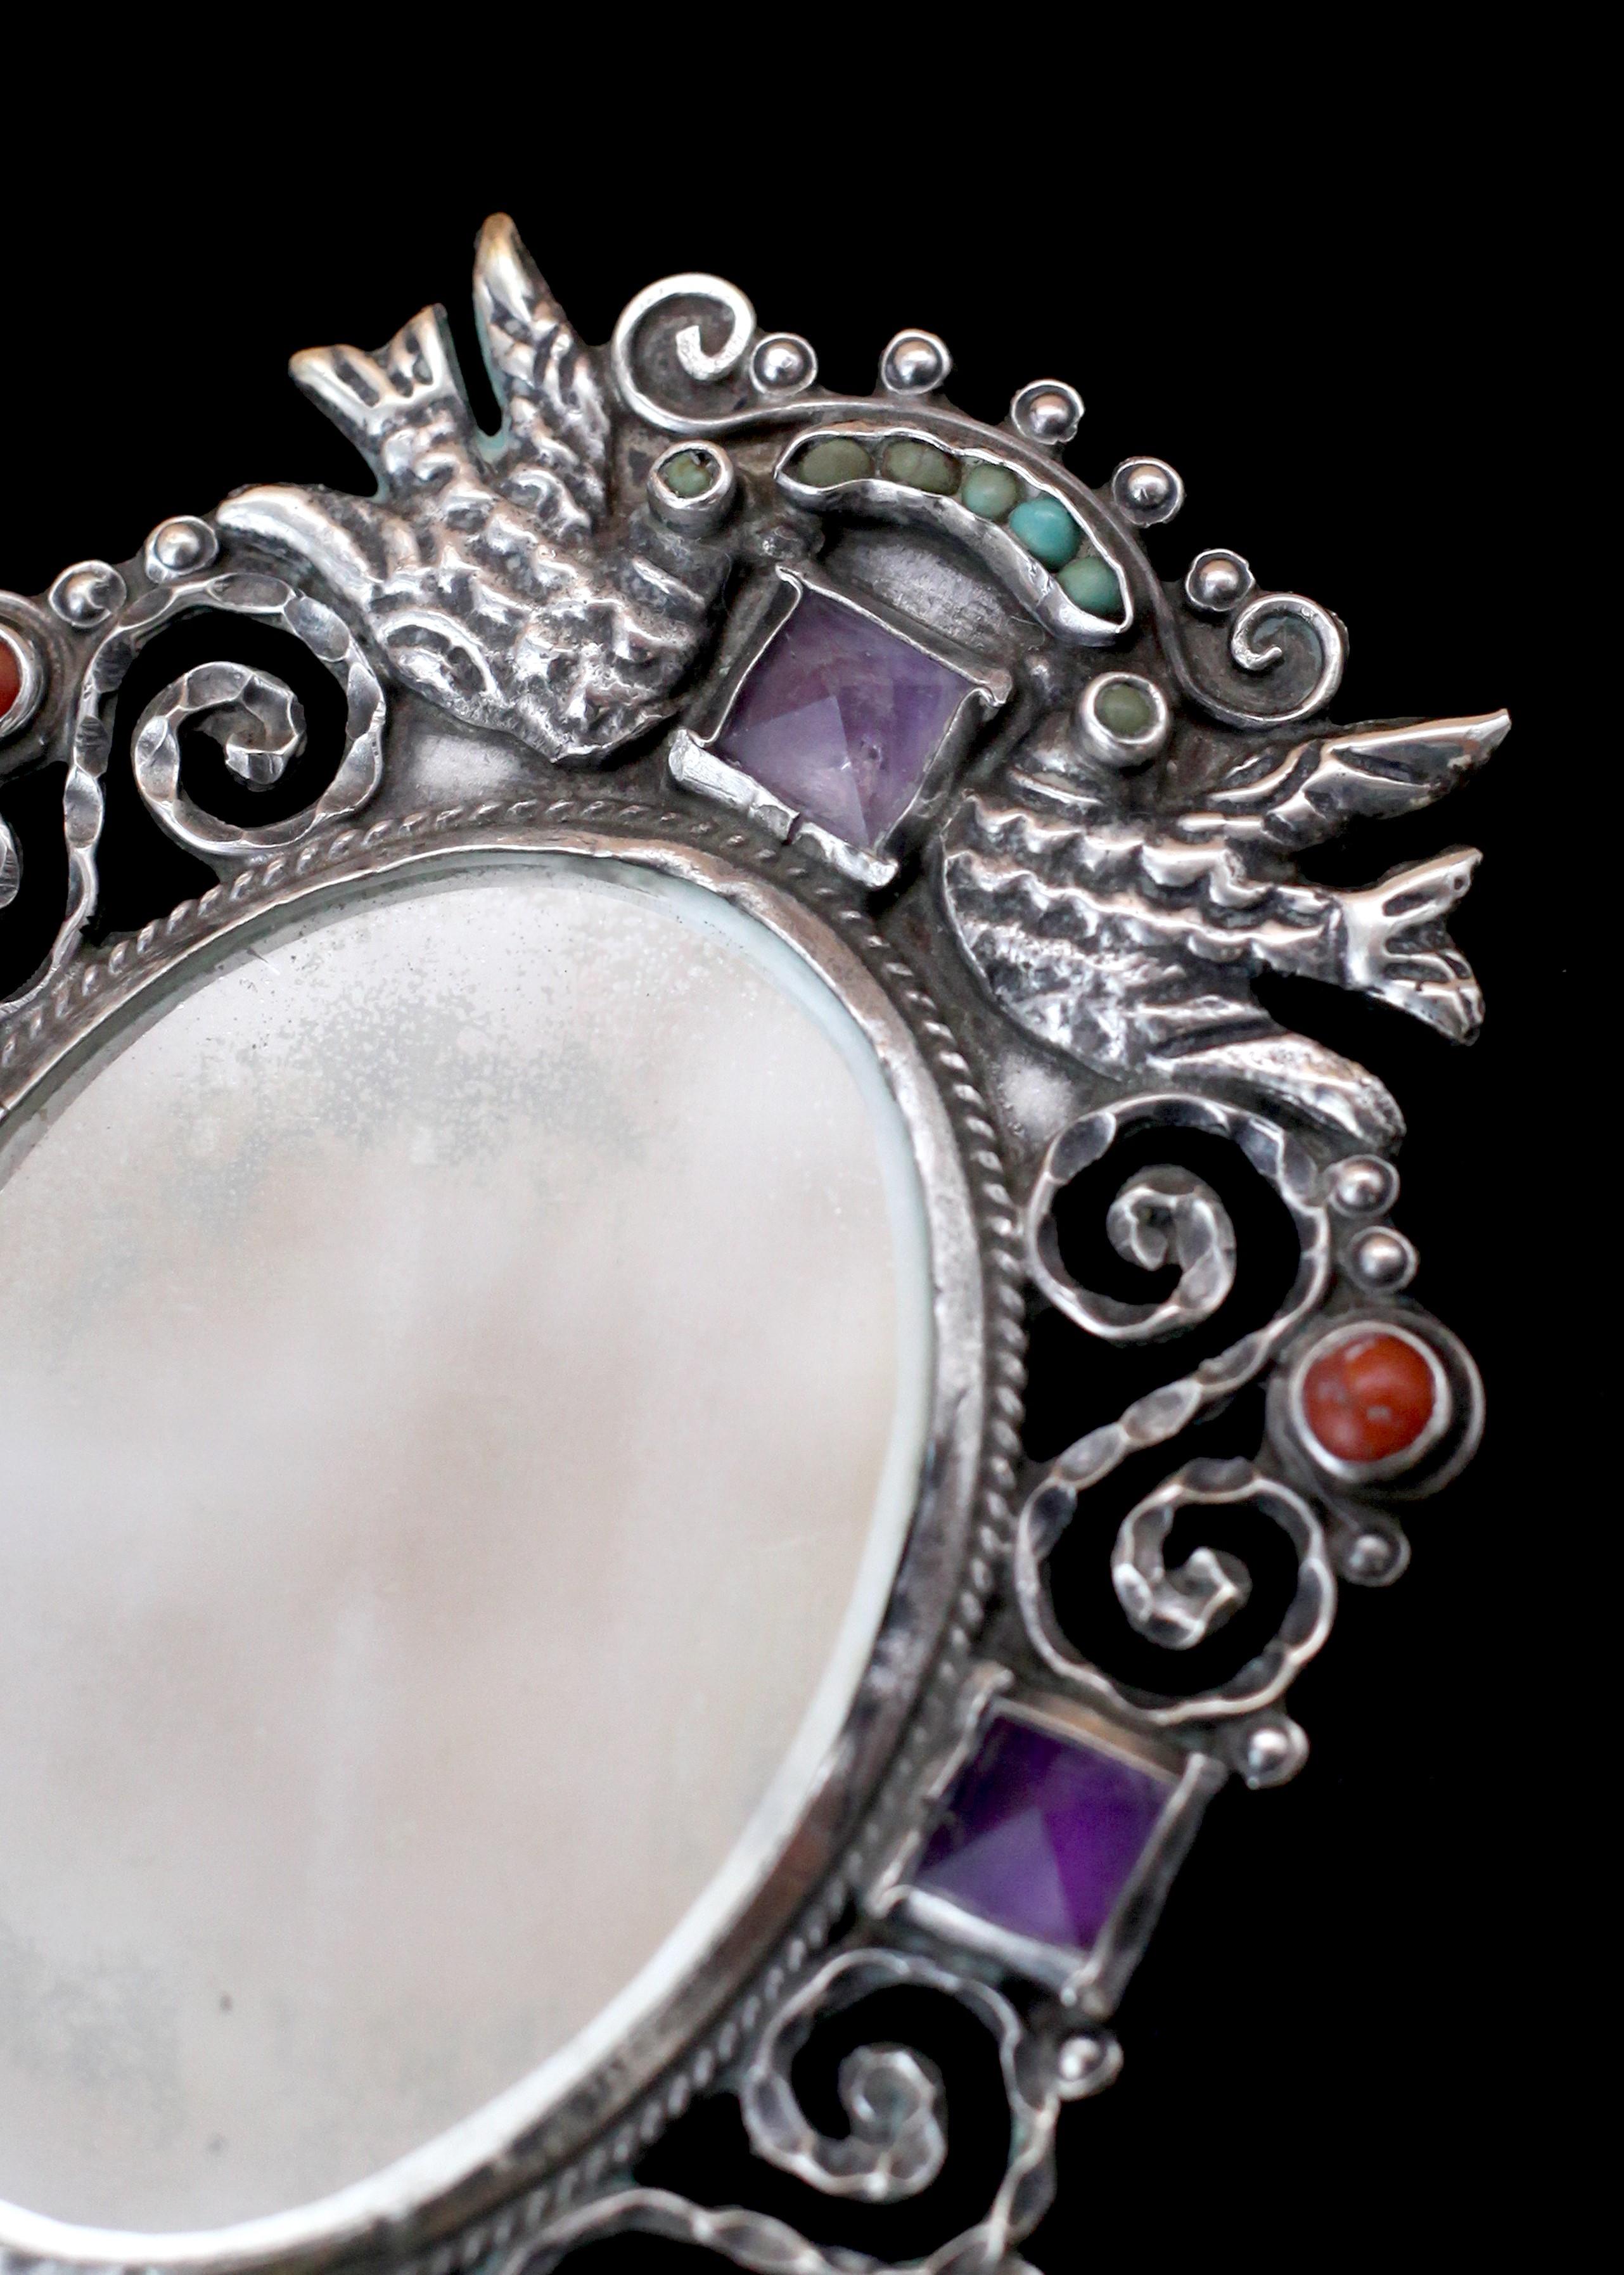 Prepare to be mesmerized in the dance of light on sterling and gems in this Matilde Poulat Gem-set Sterling Mirror. With plenty of artistry to devour, you'll get lost as you gaze into this sterling mirror. Adorned with gem inlays, it doesn't just